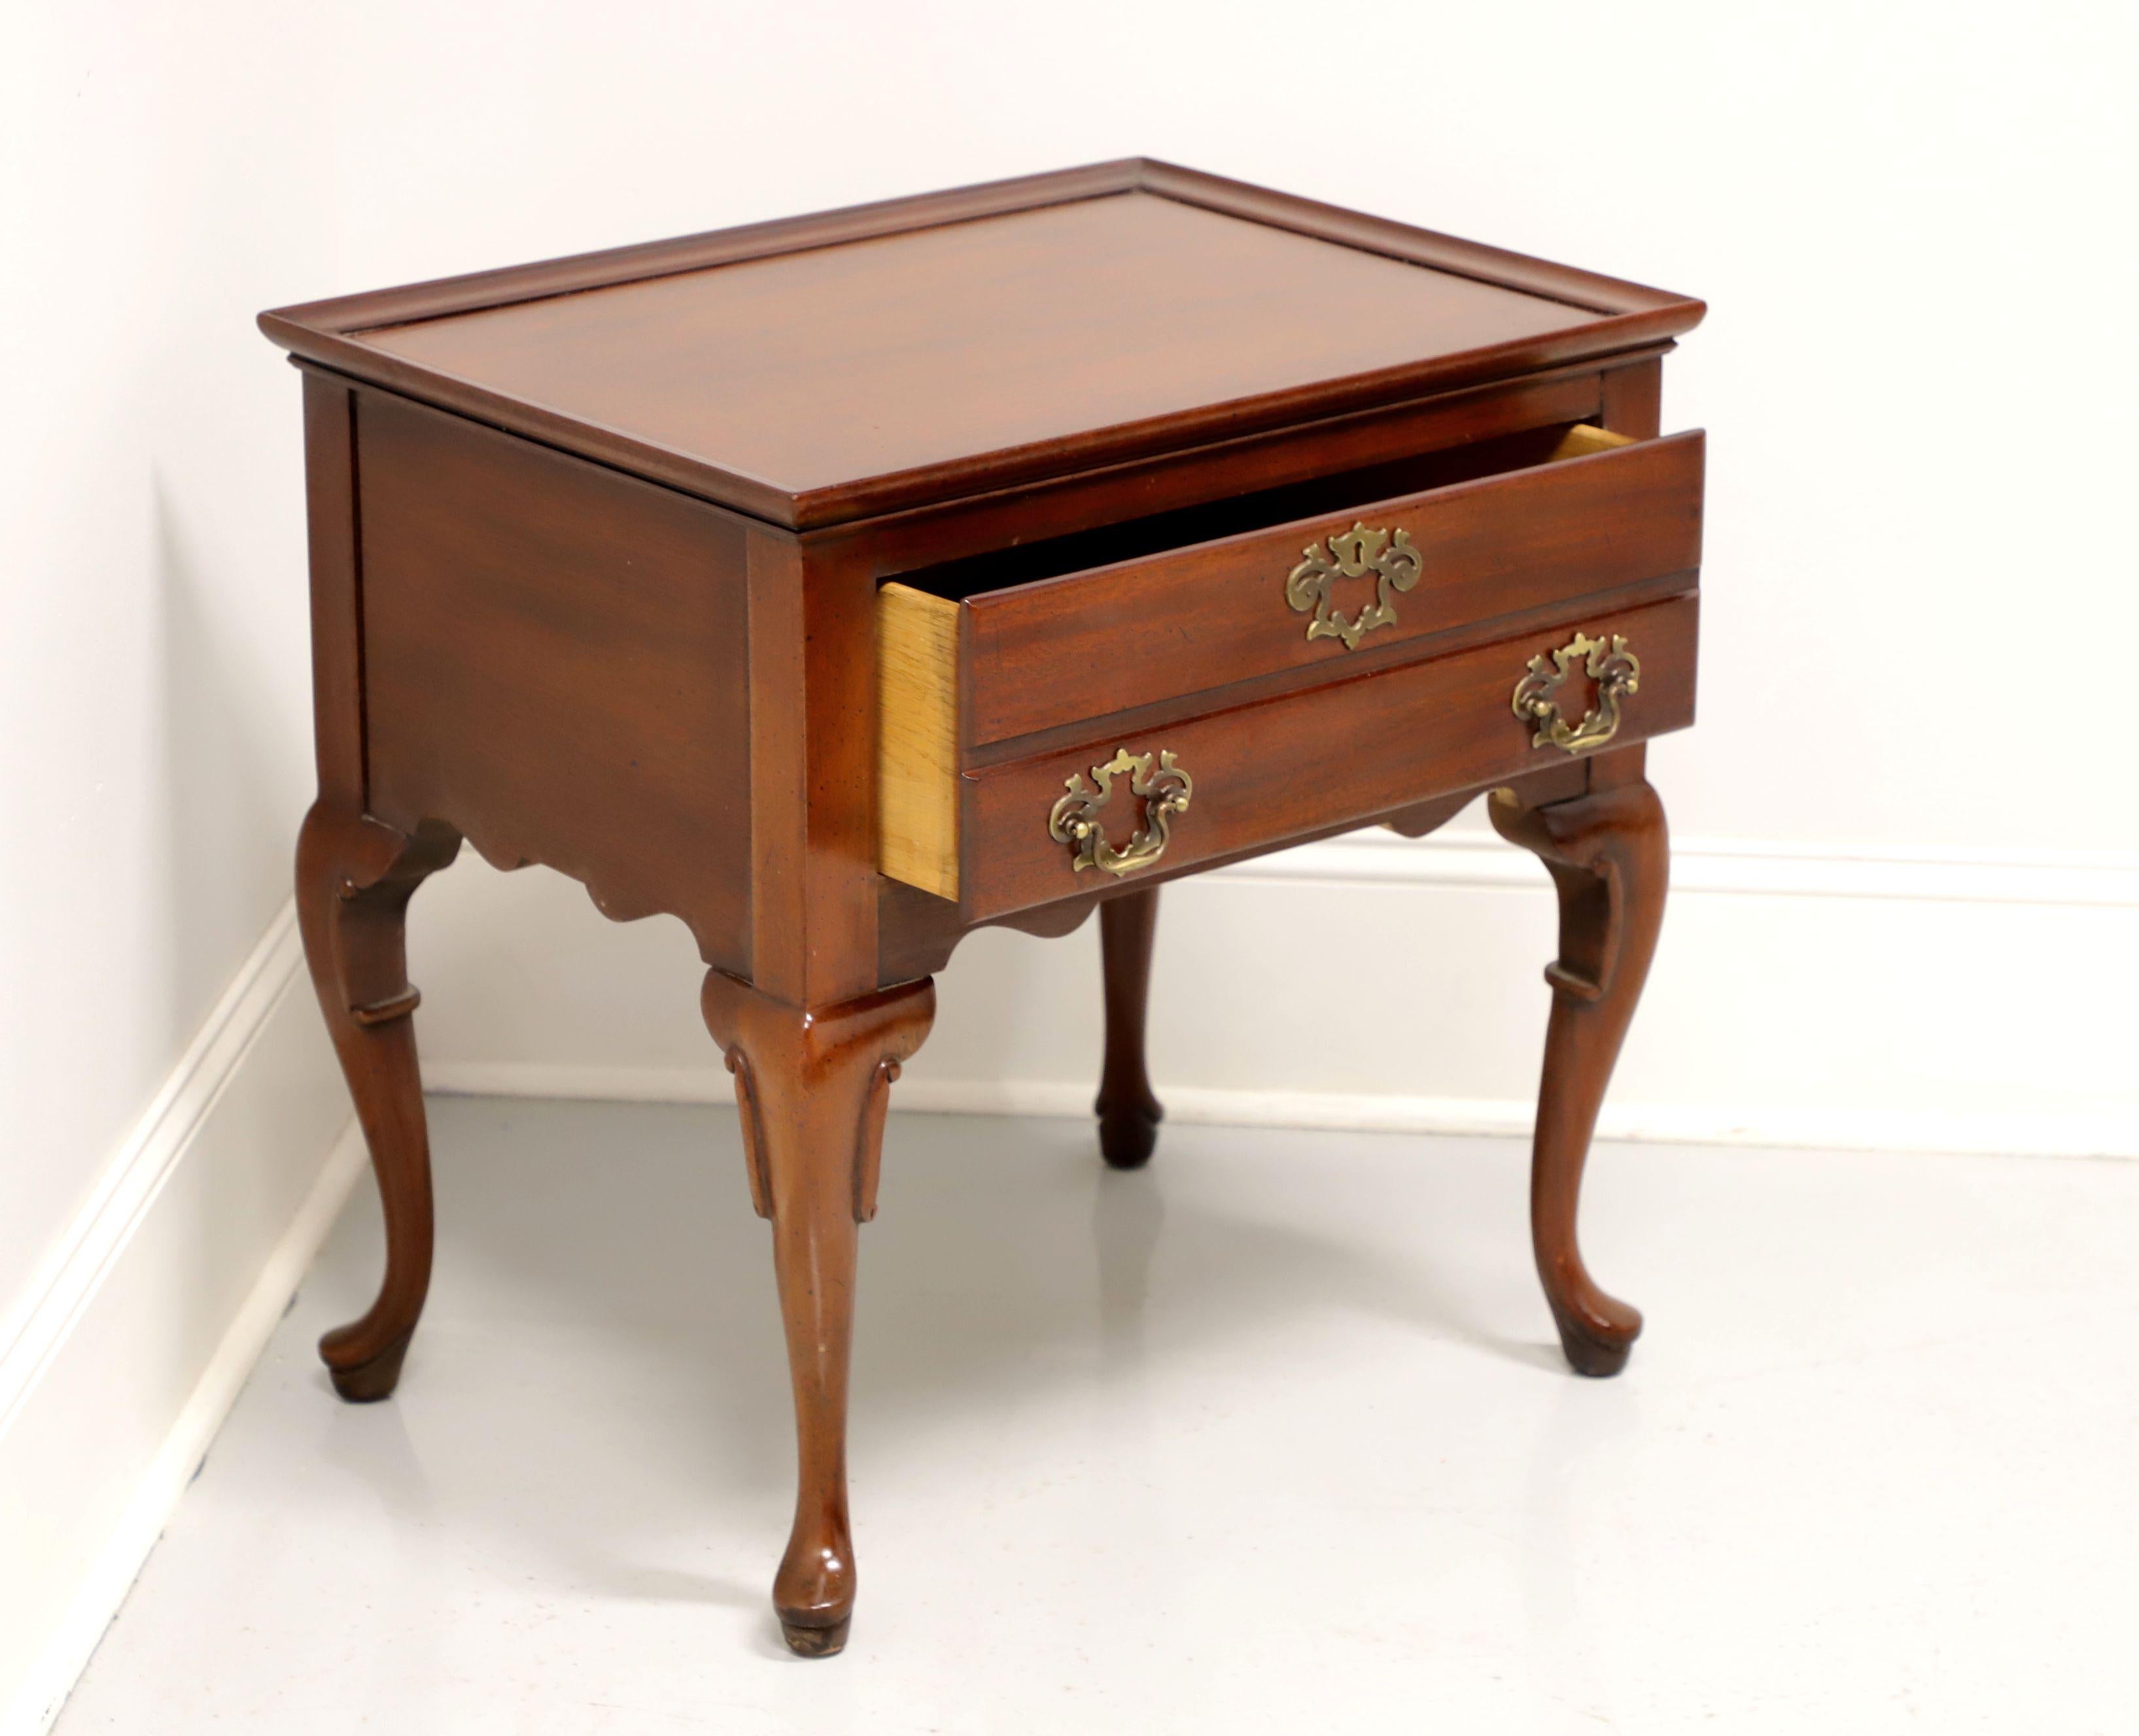 20th Century HICKORY CHAIR James River Mahogany Queen Anne Nightstand / Accent Side Table - B